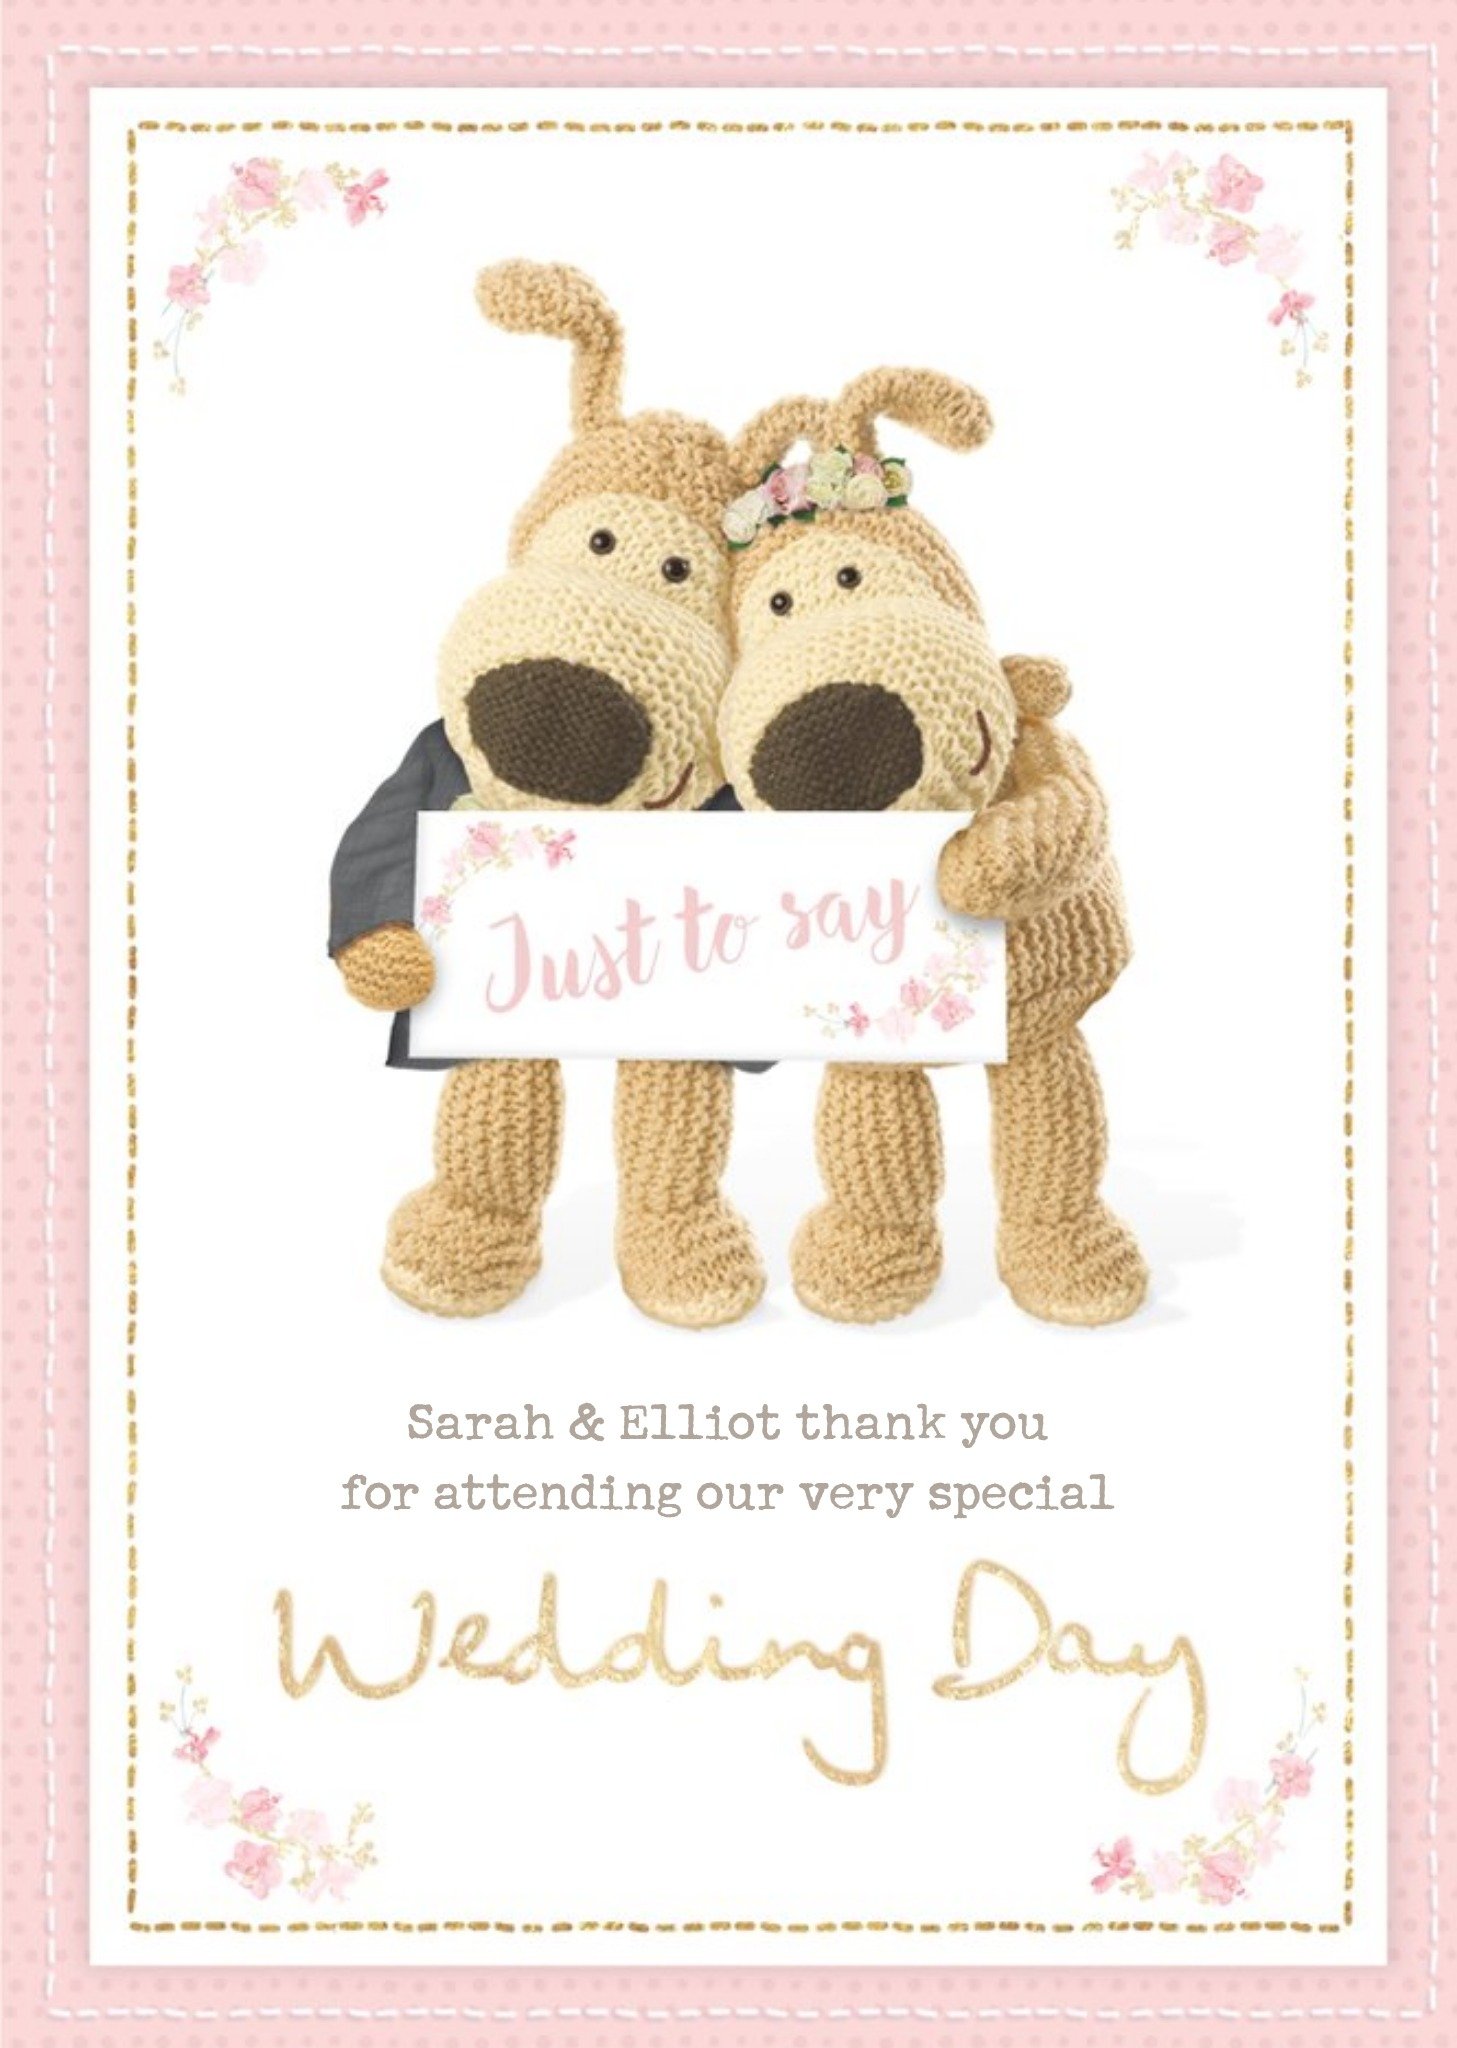 Boofle Sentimental Wedding Day Card Just To Say Thank You, Large